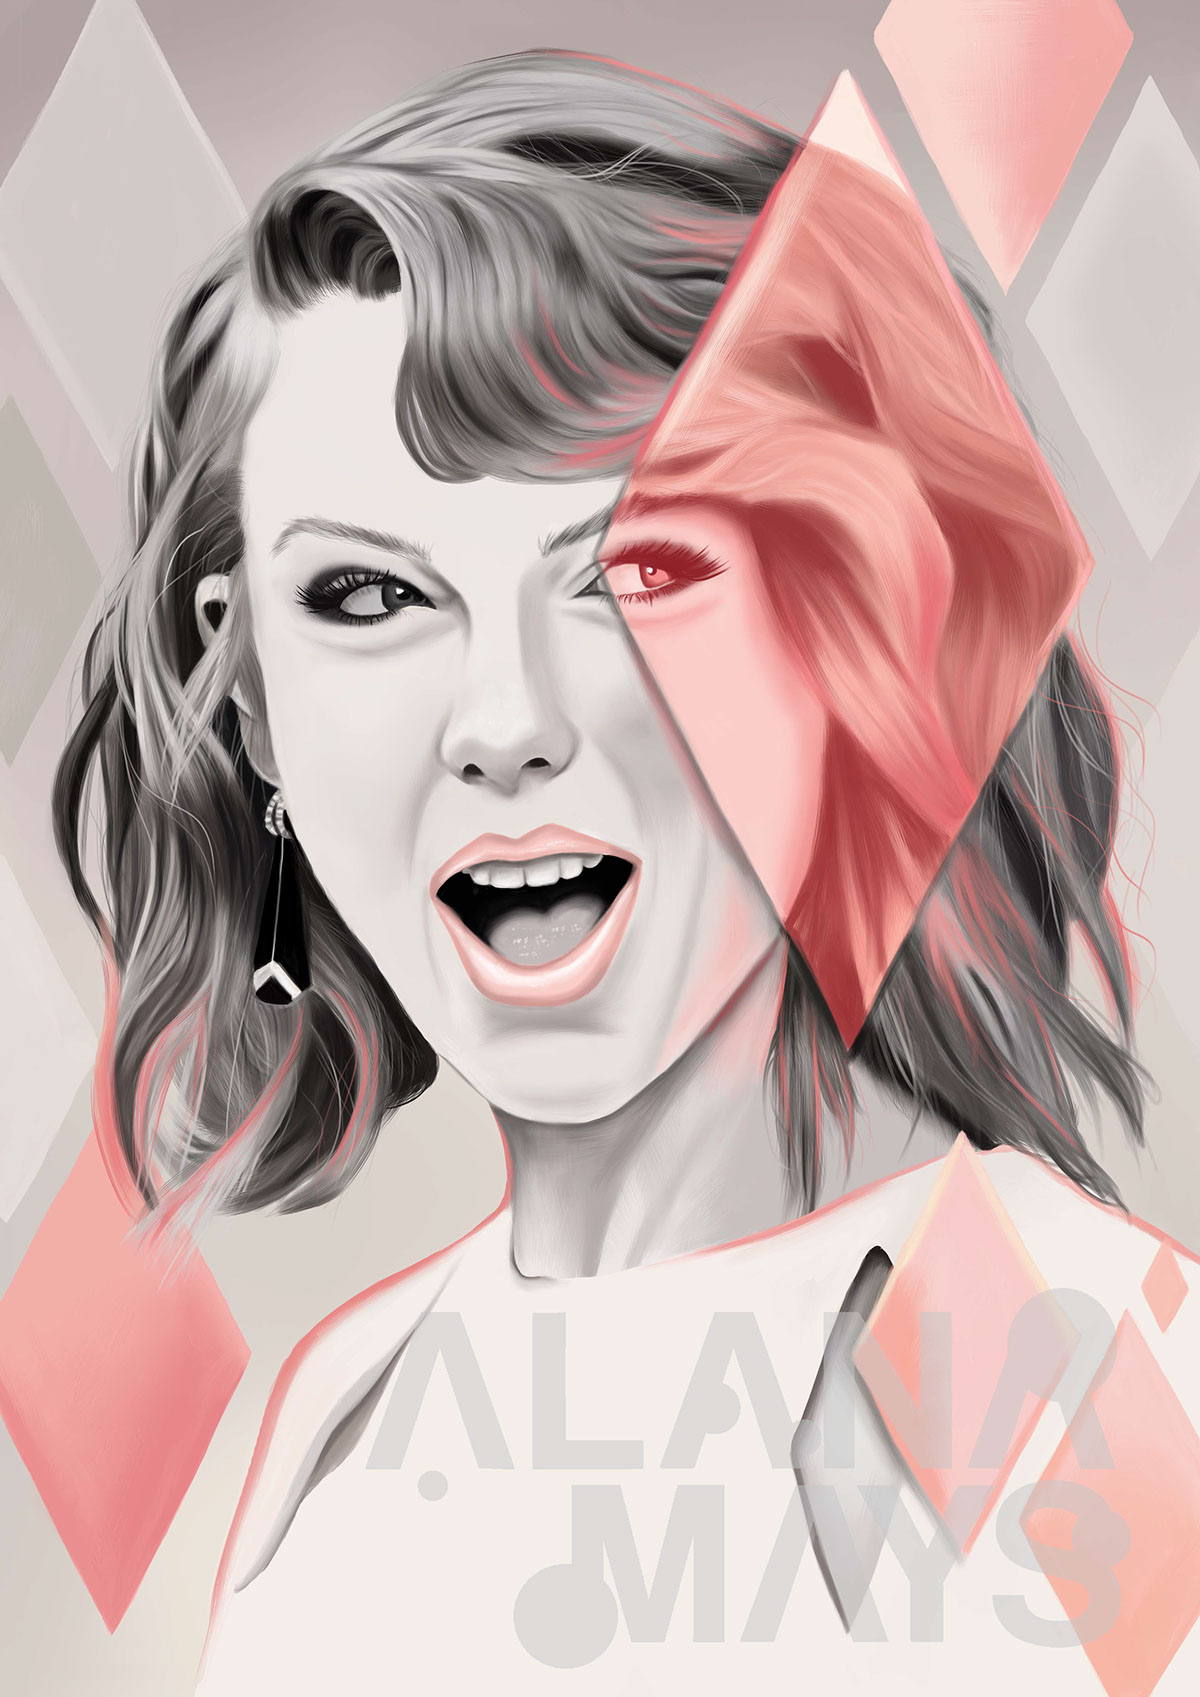 taylor swift Tay Tay celebrities musician country singer  art Portraiture female portraiture Famous people beautiful people painted taylor swift painted portraiture fashion illustration photoshop Digital Paintings